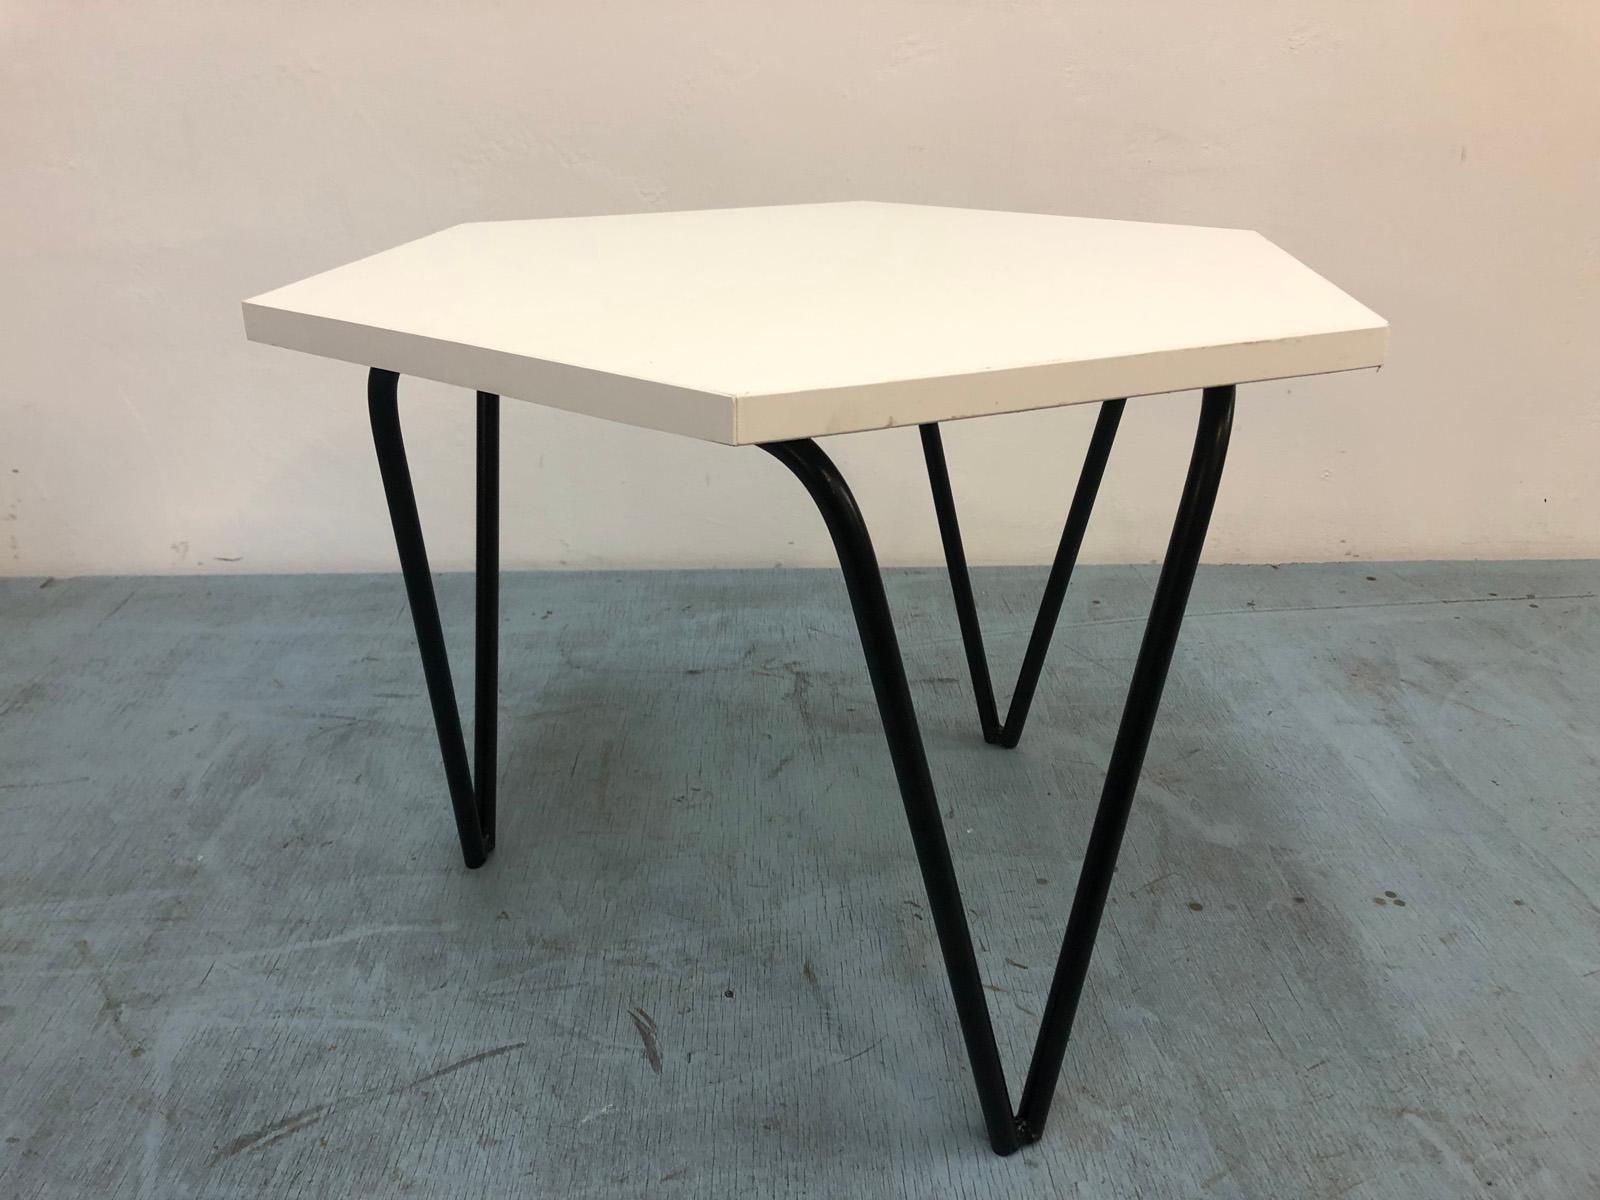 Set of Three Low Hexagonal Coffee Tables by Giò Ponti for Isa Bergamo, Italy 50s For Sale 7